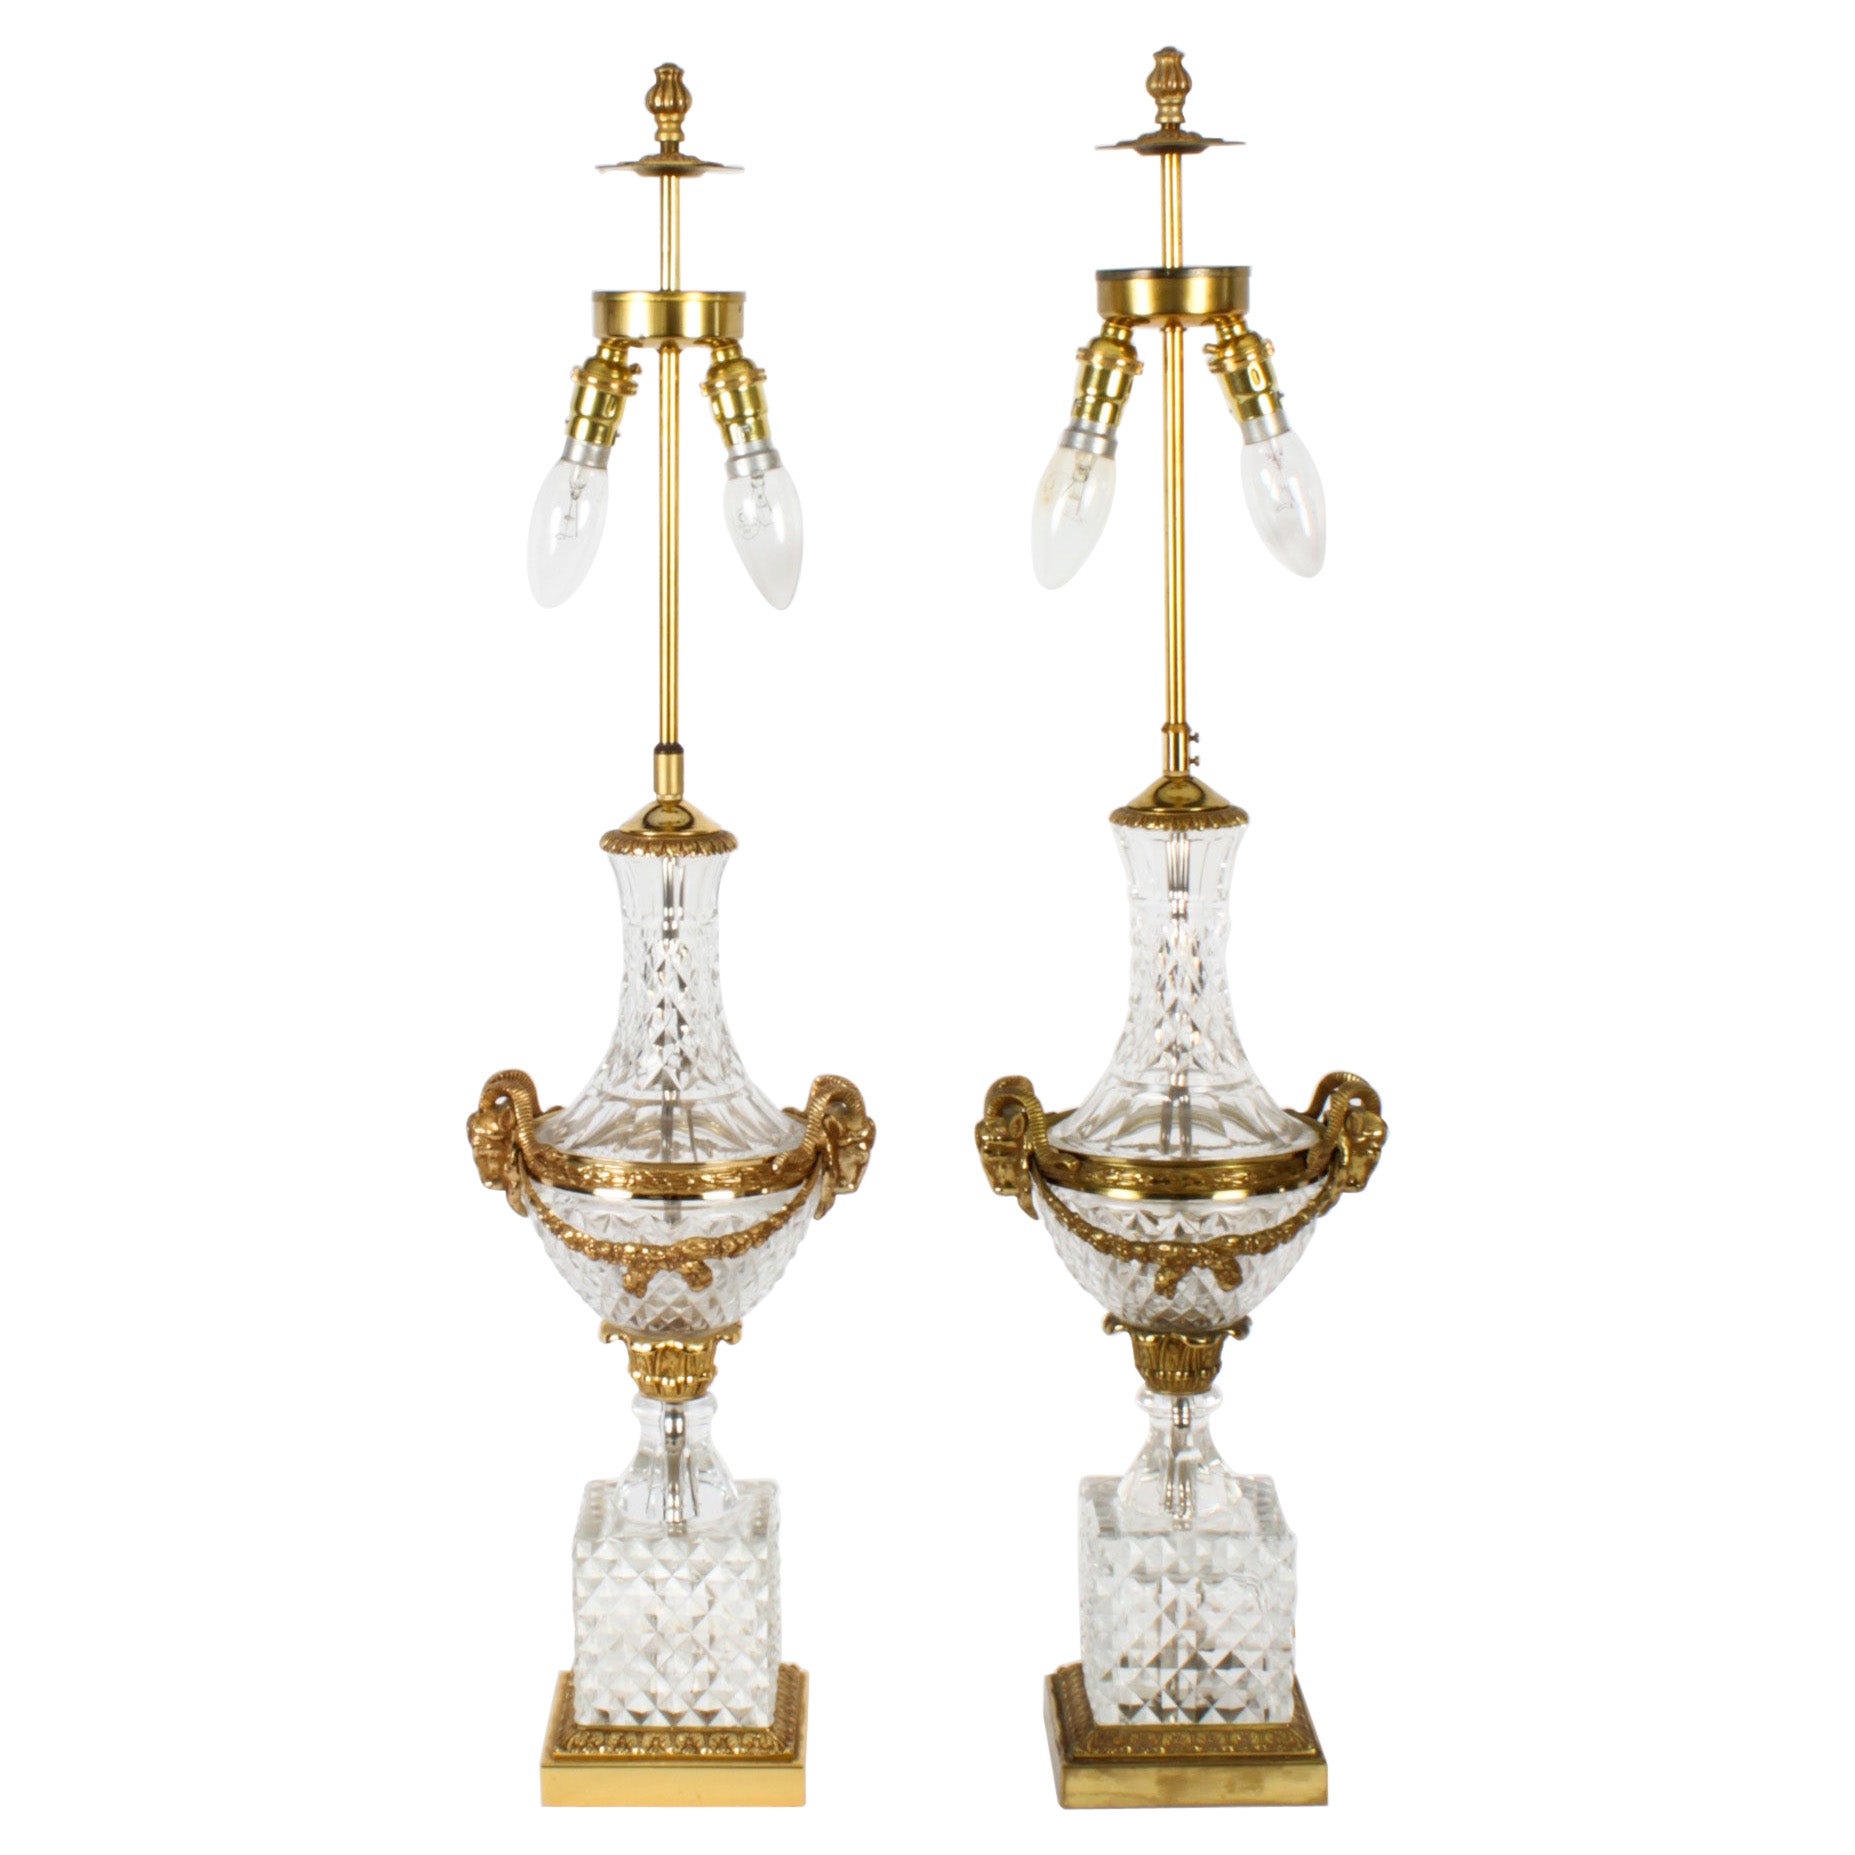 Antique Pair of French Ormolu & Glass Baccarat Table Lamps, Mid 20th C